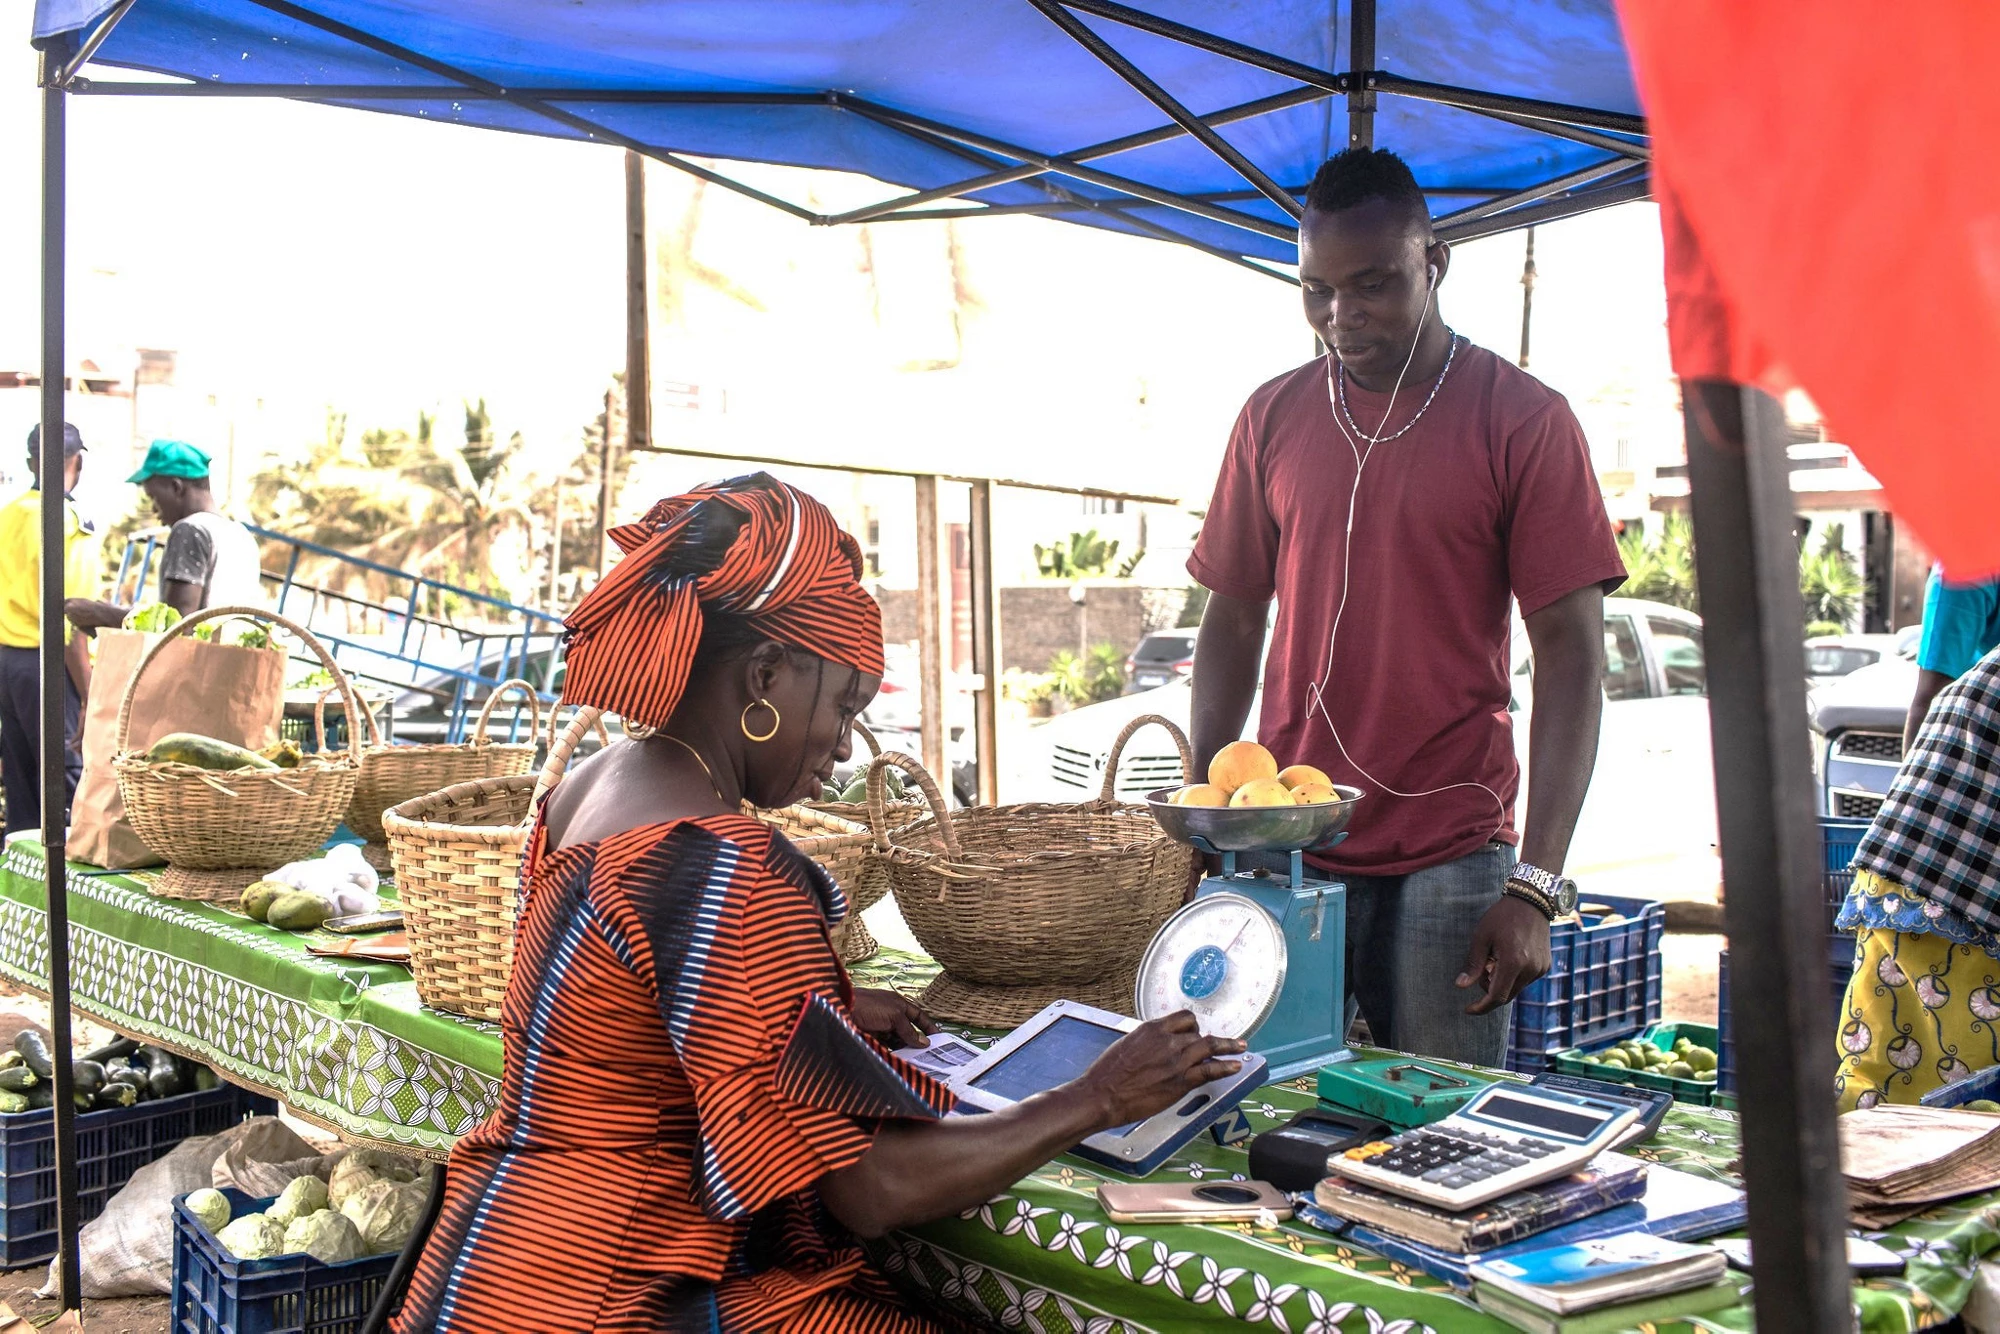 Binta is filling the vegetables she sells on her Weebi tablet. The application has helped her manage her stock and sales.